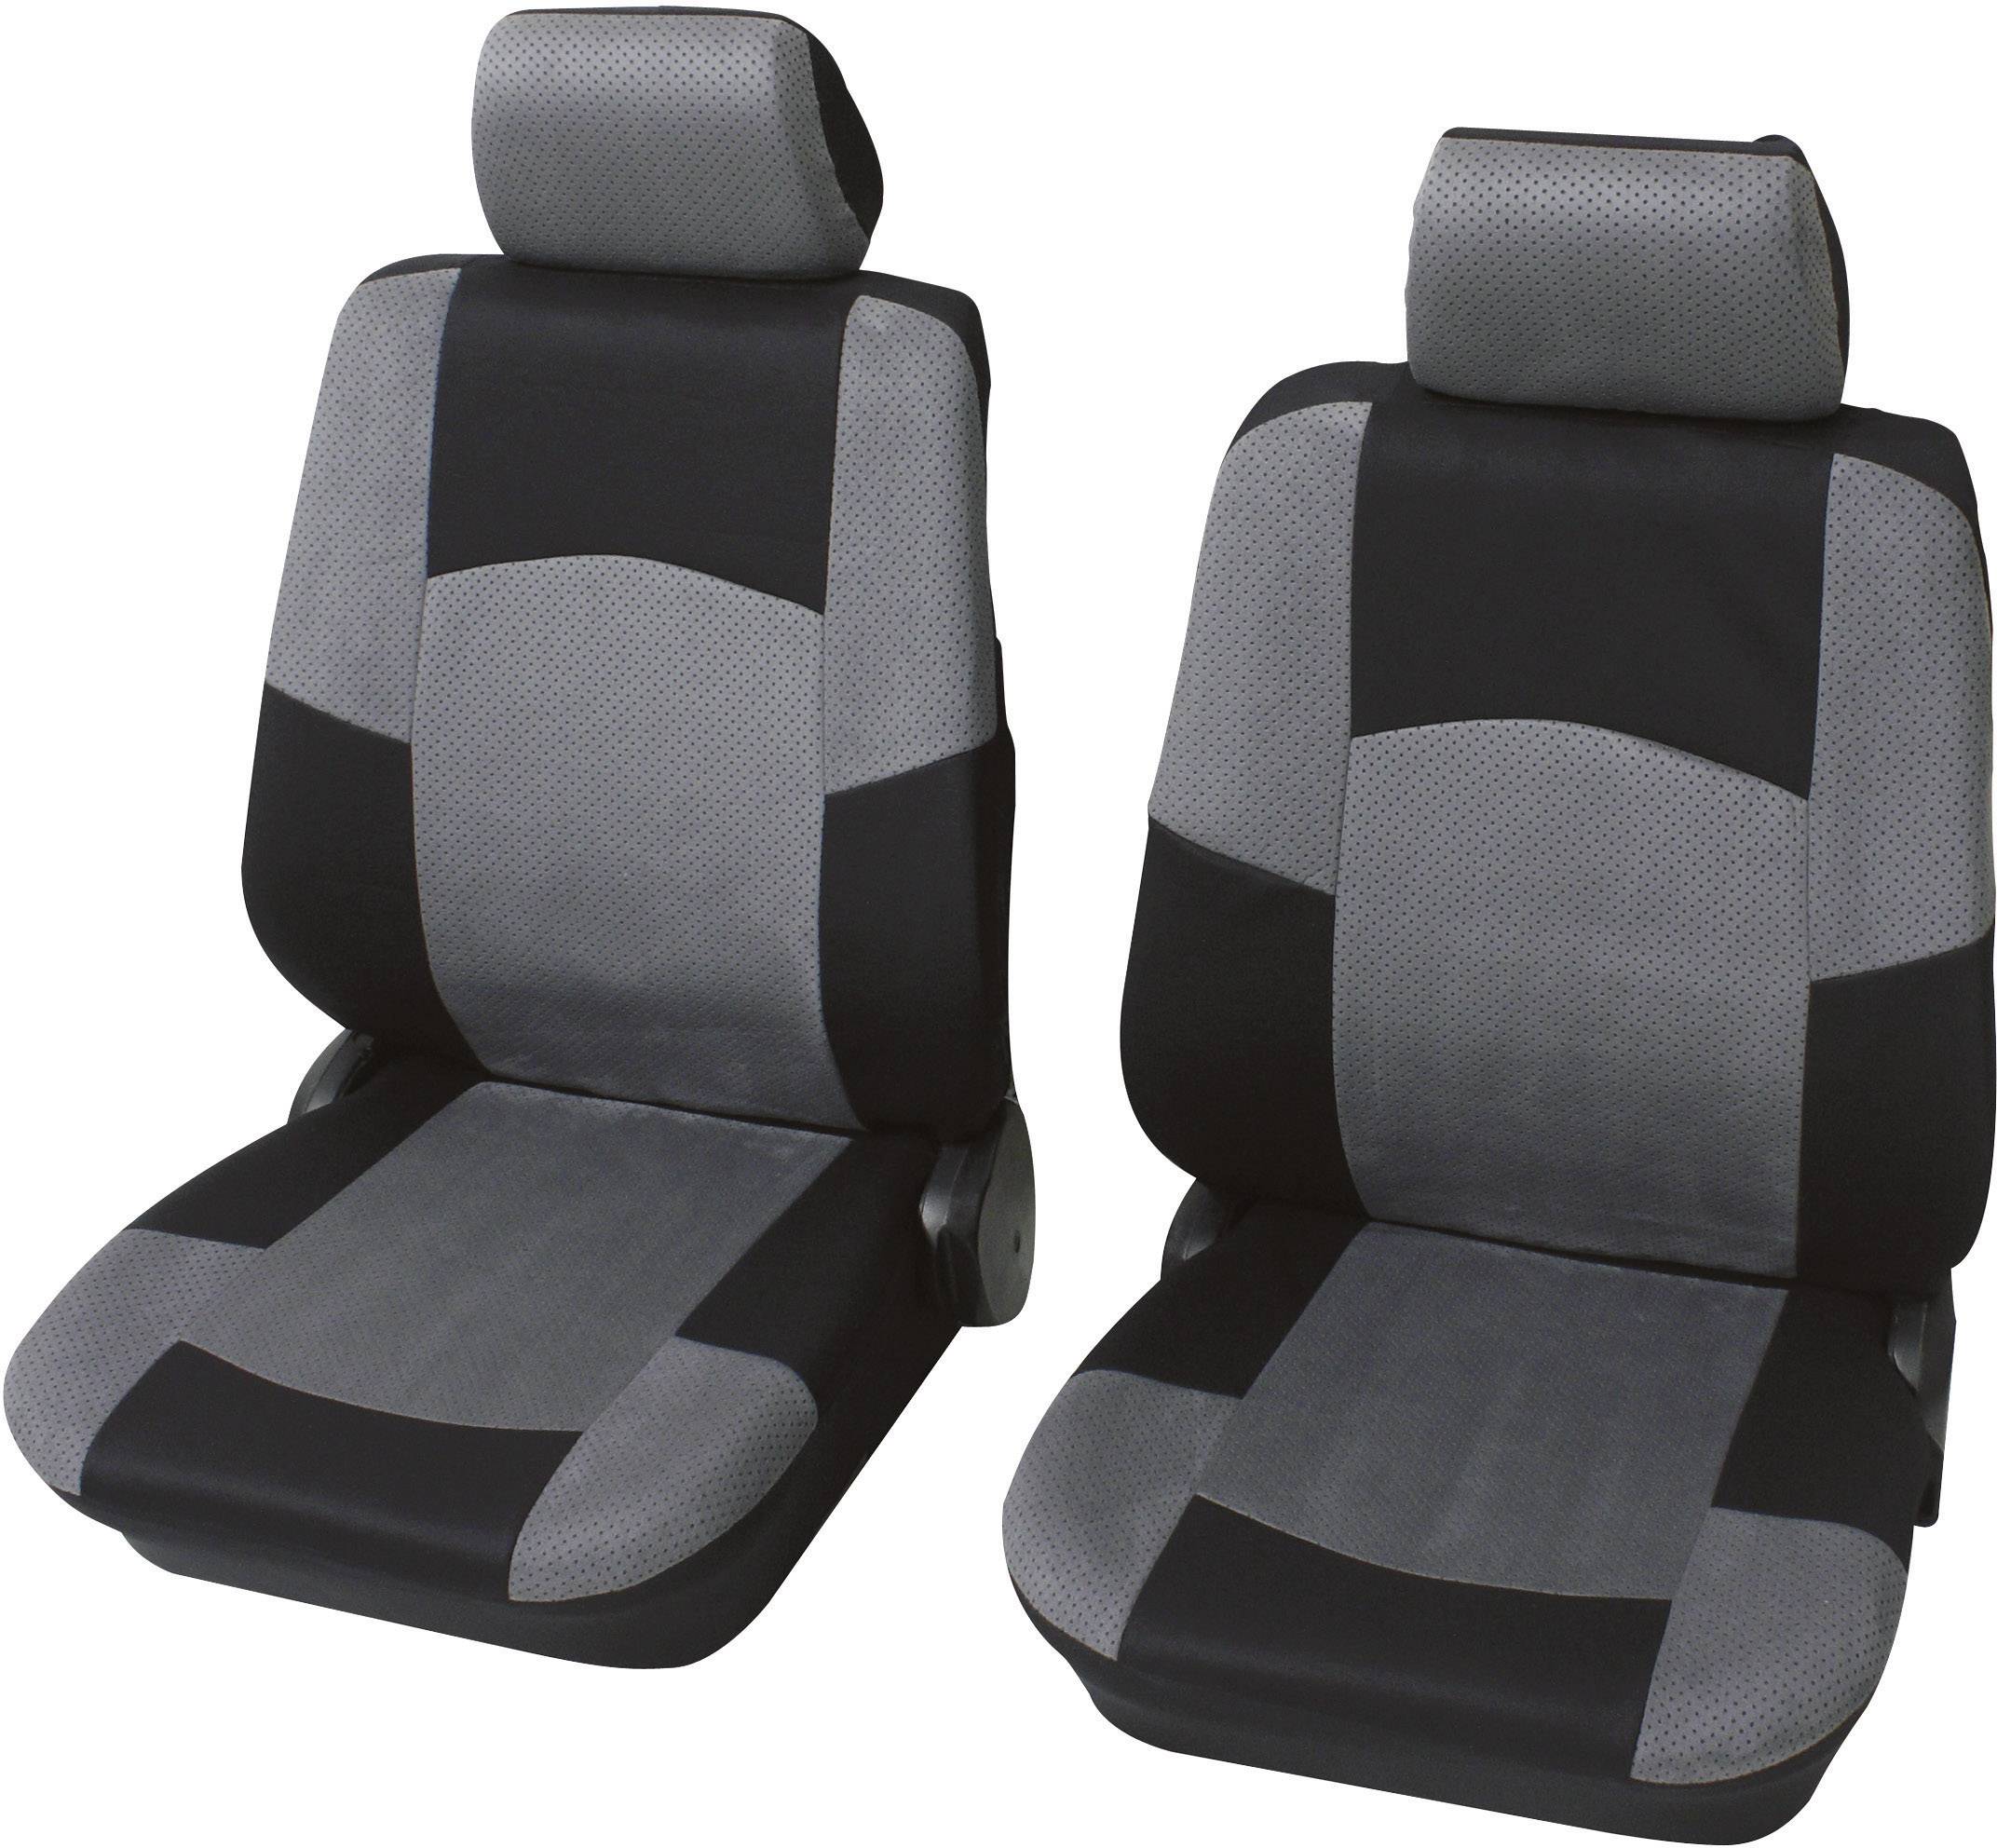 6pc Gray Black Seat Covers Separate Headrest Covers Universal Set